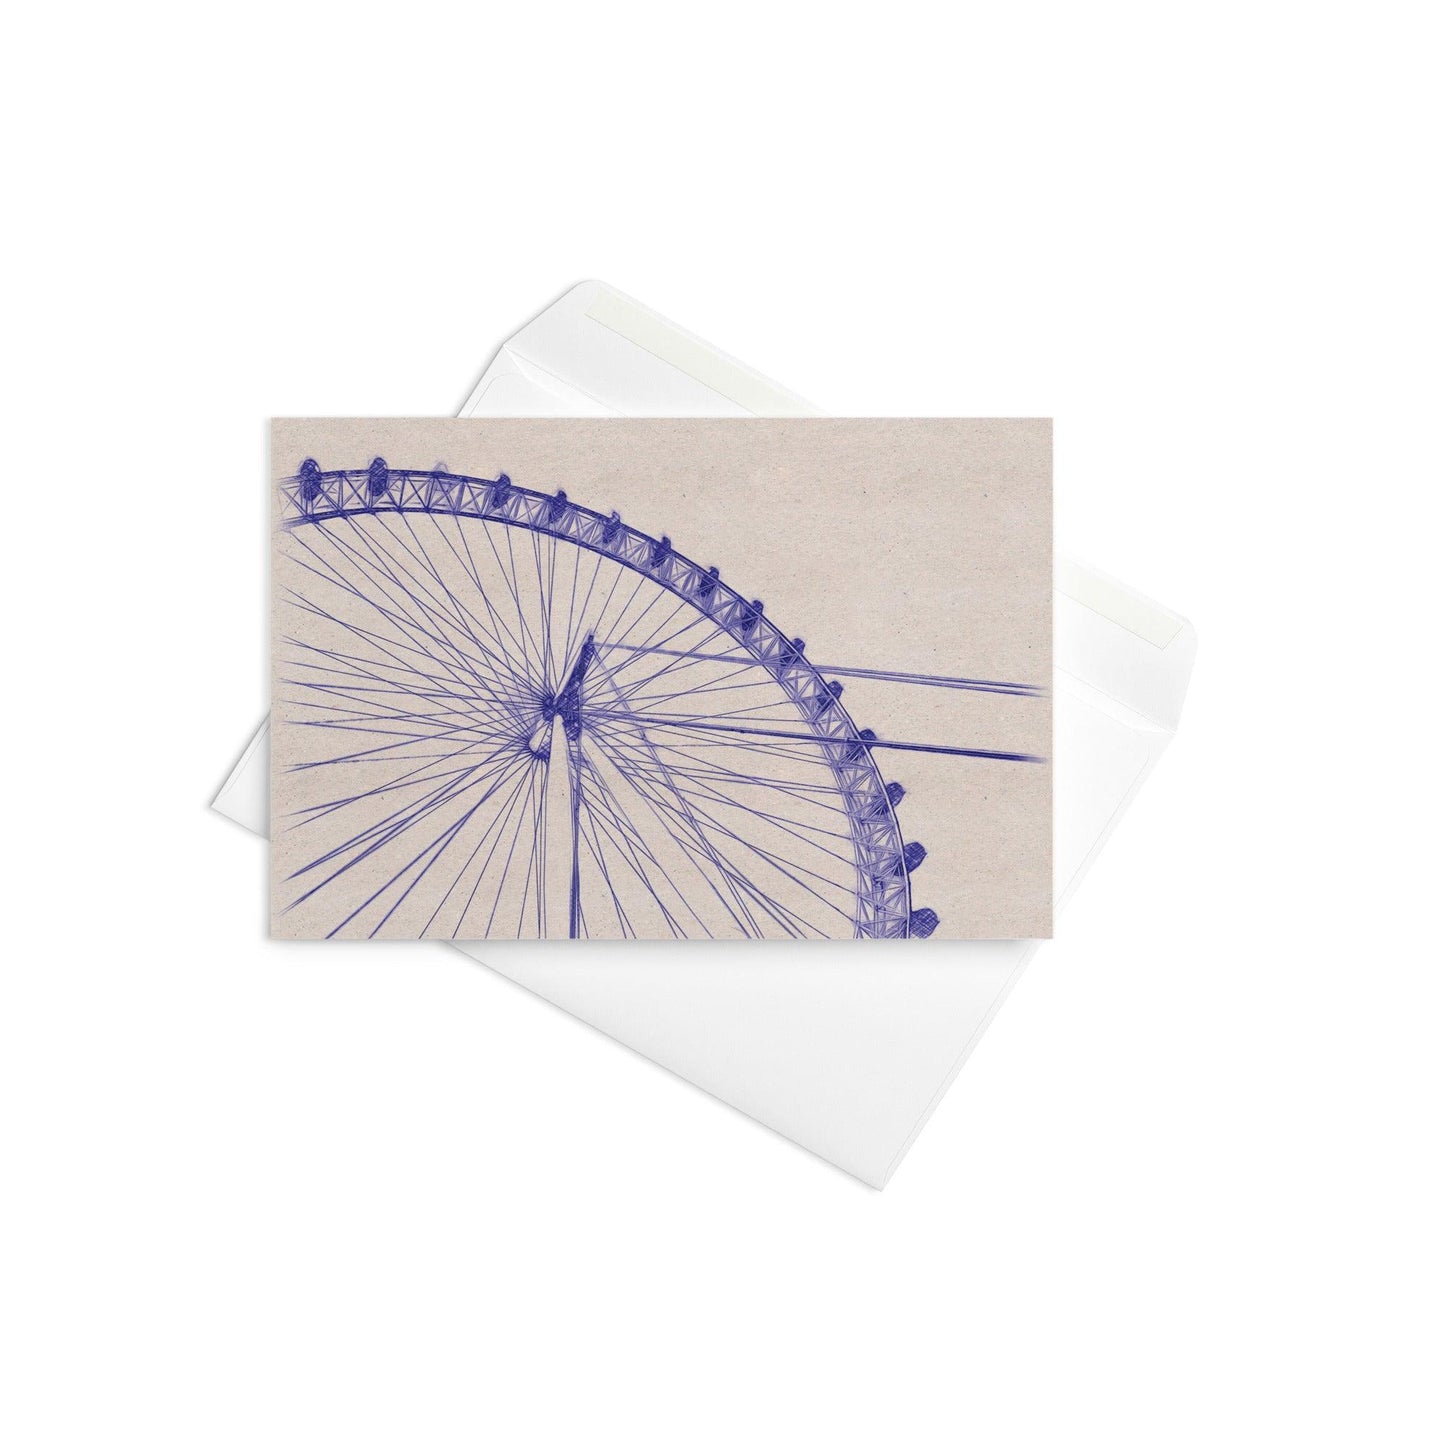 Millennium Wheel - Note Card - iSAW Company